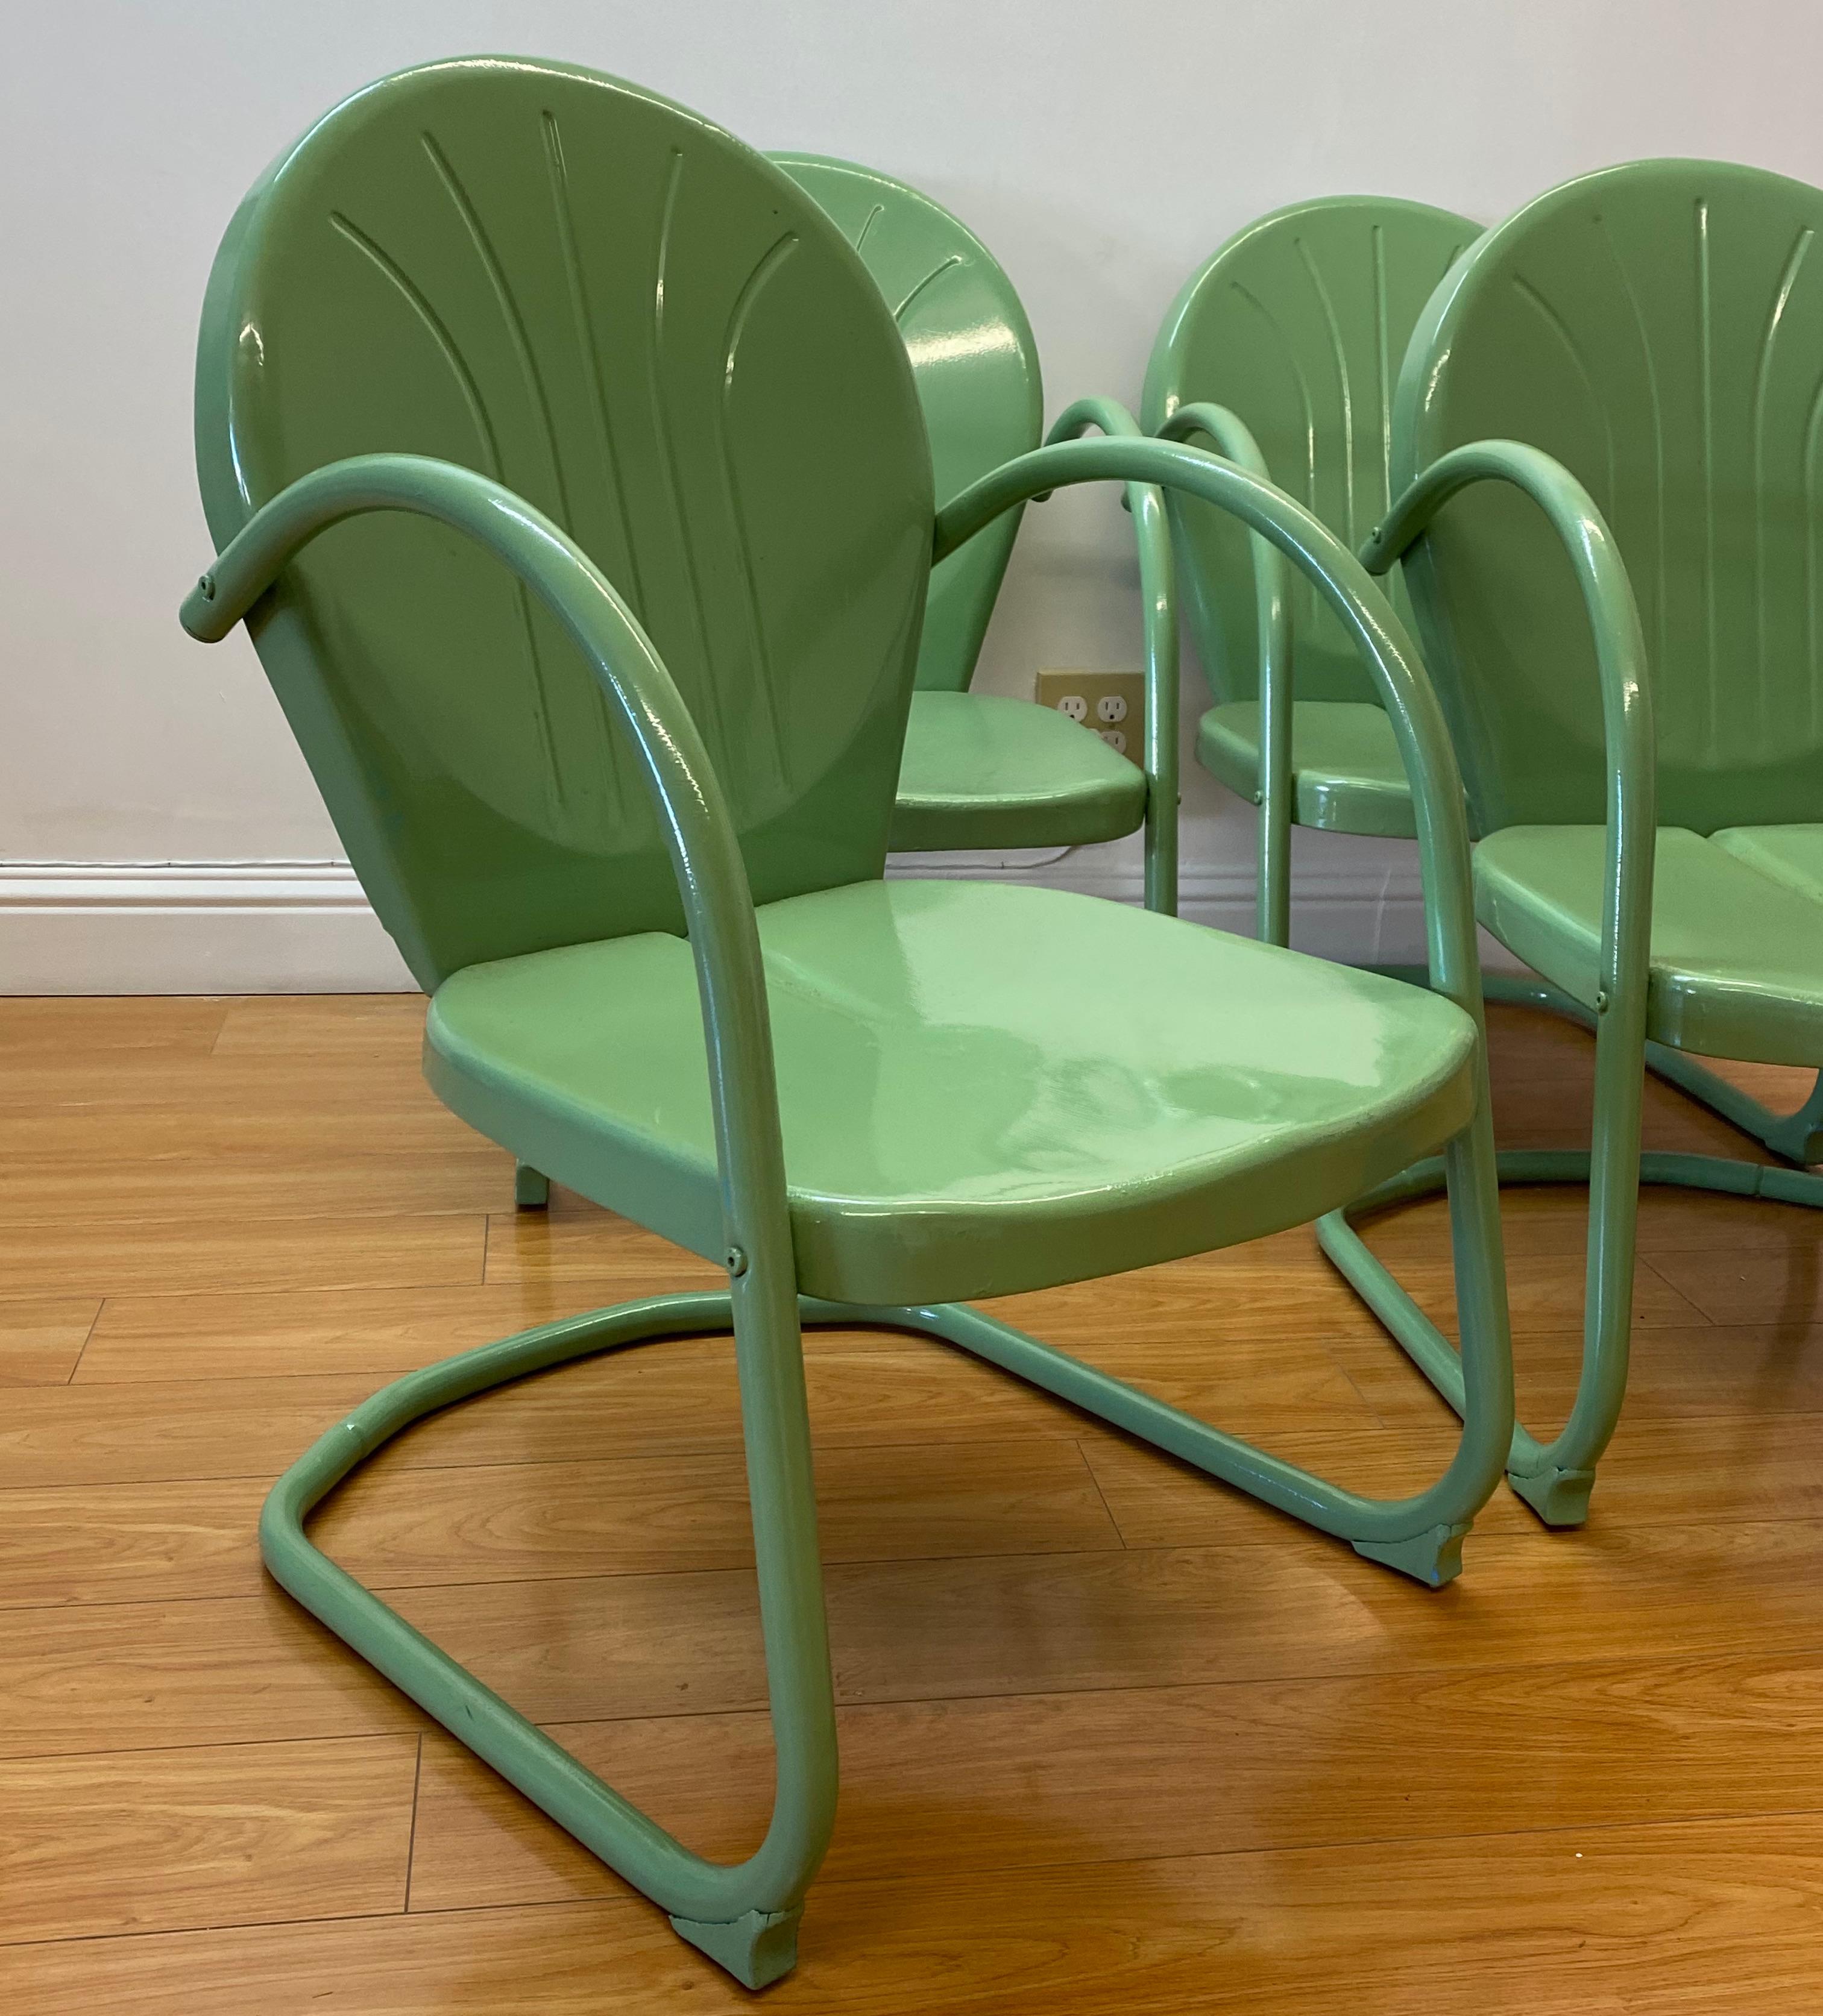 Set of Four vintage mint green enameled metal patio garden chairs, C.1940s

Restored old school metal patio chairs

These classic chairs have been restored and updated with a lovely mint green enamel covering

The chairs show some past